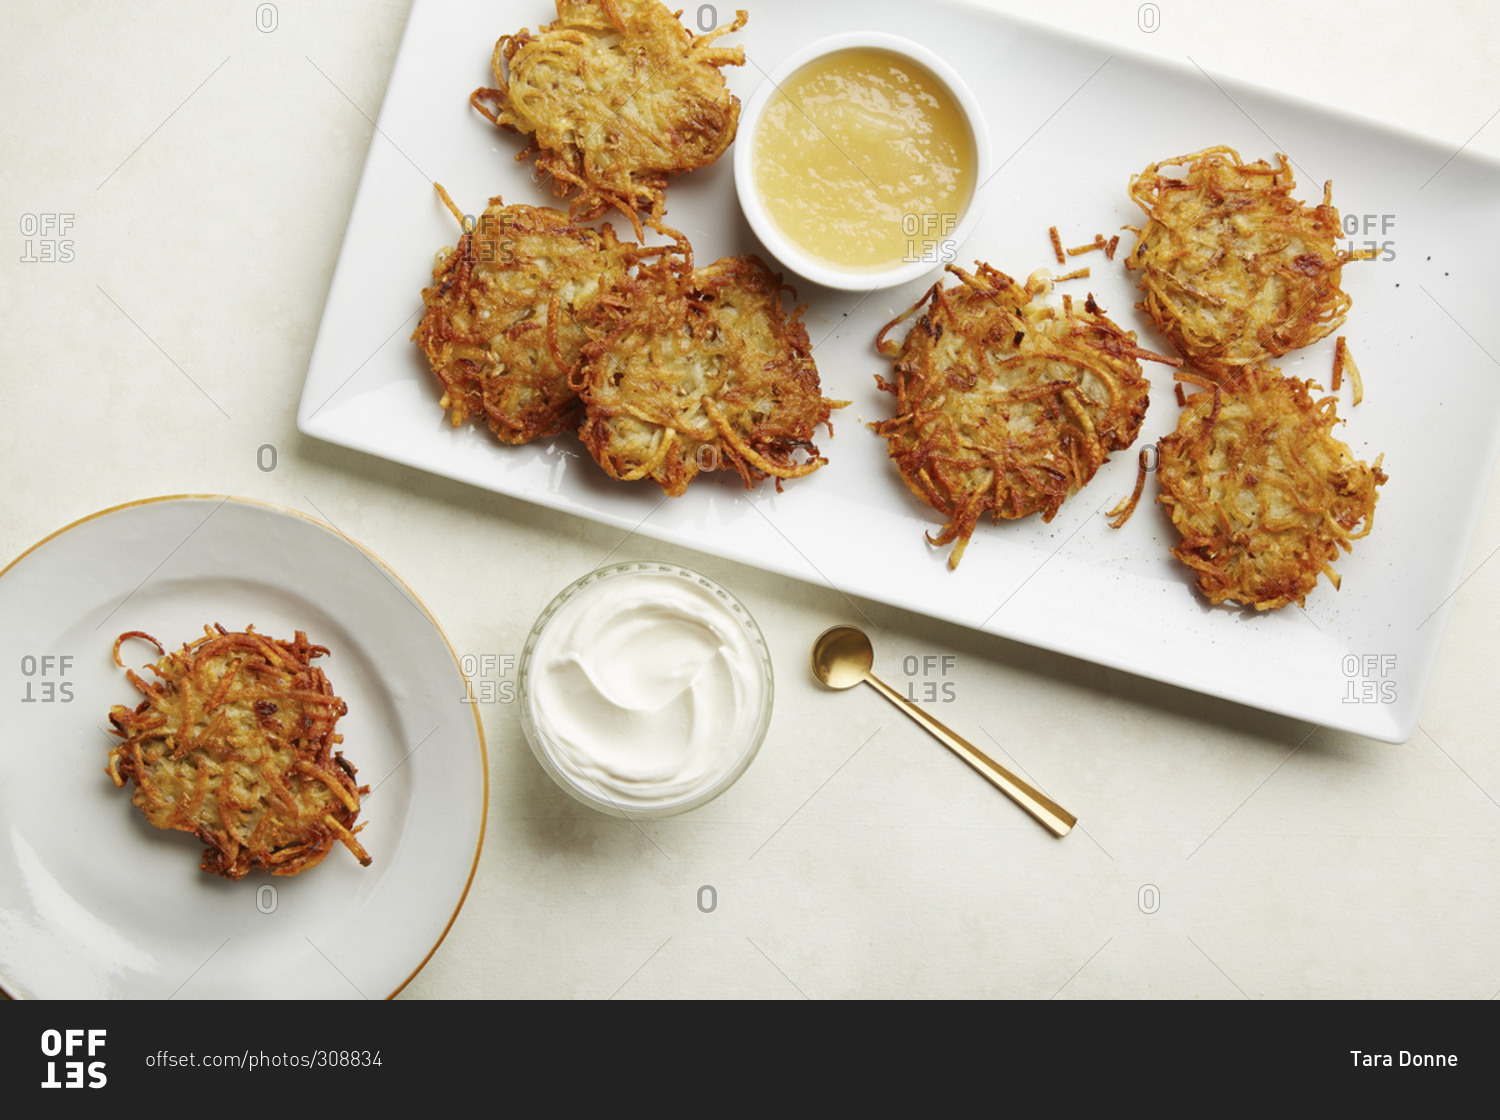 Platter of latkes with applesauce and sour cream